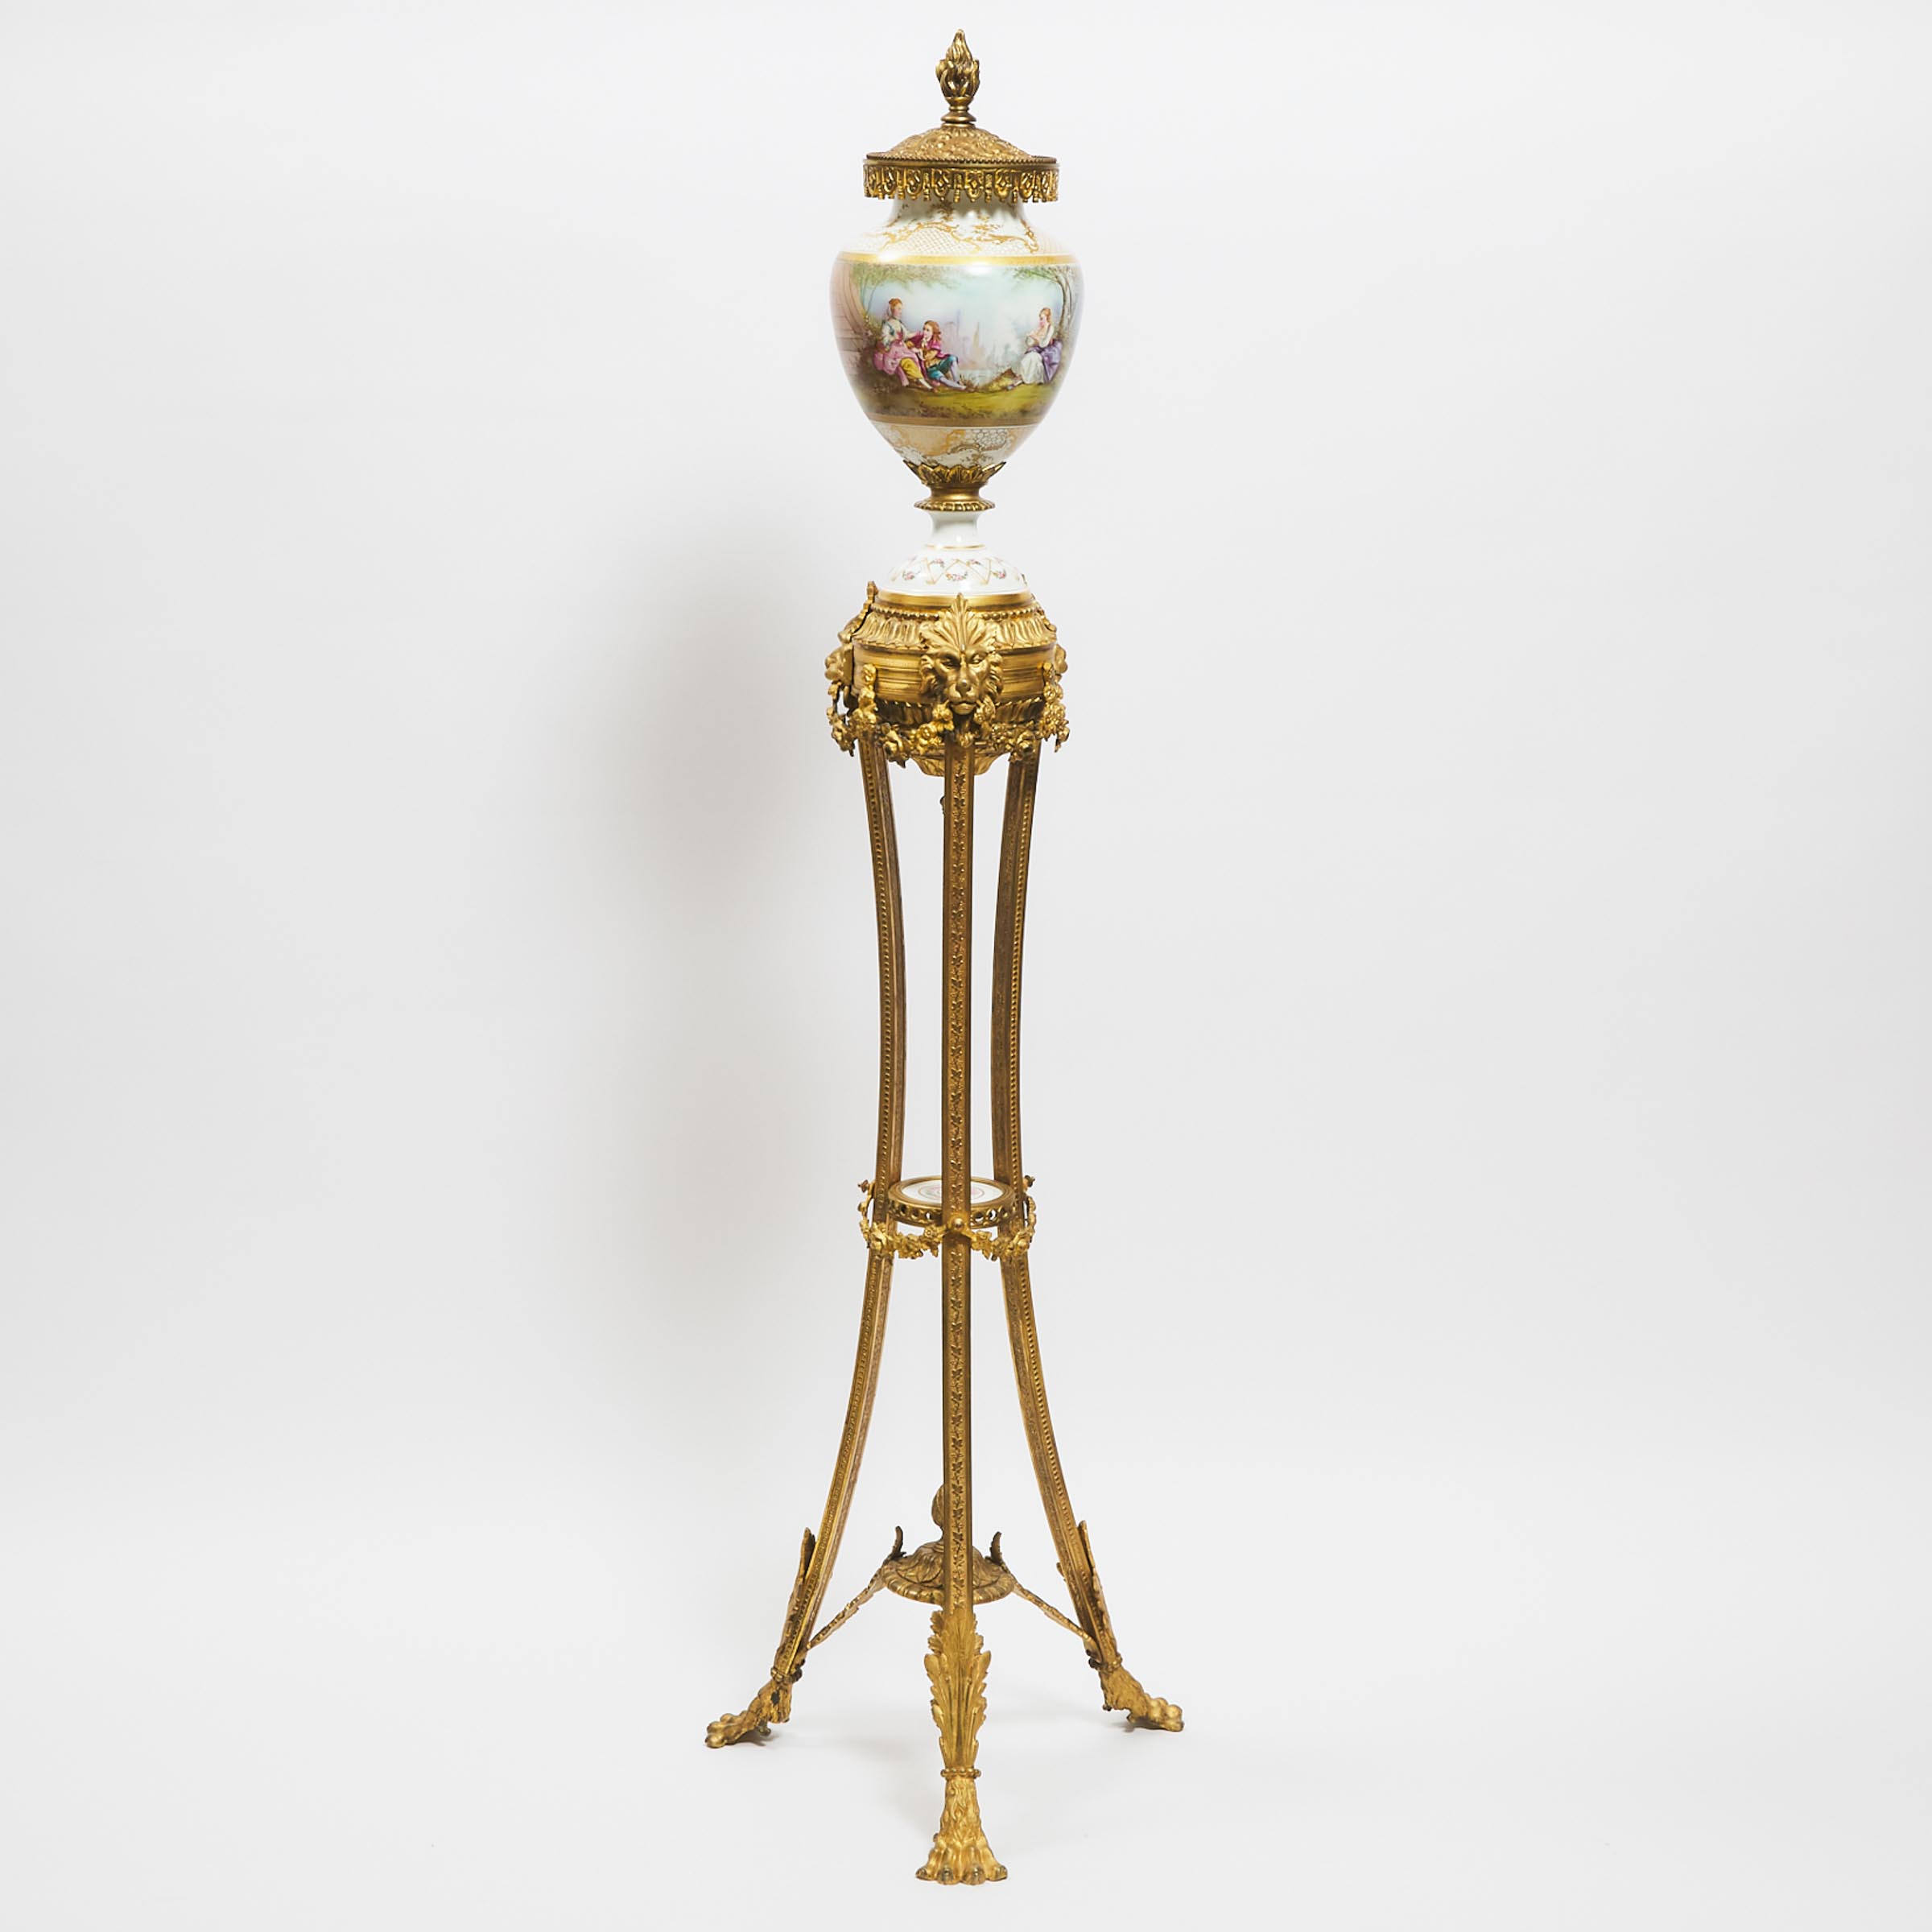 'Sèvres' Vase on Guéridon Stand, early 20th century